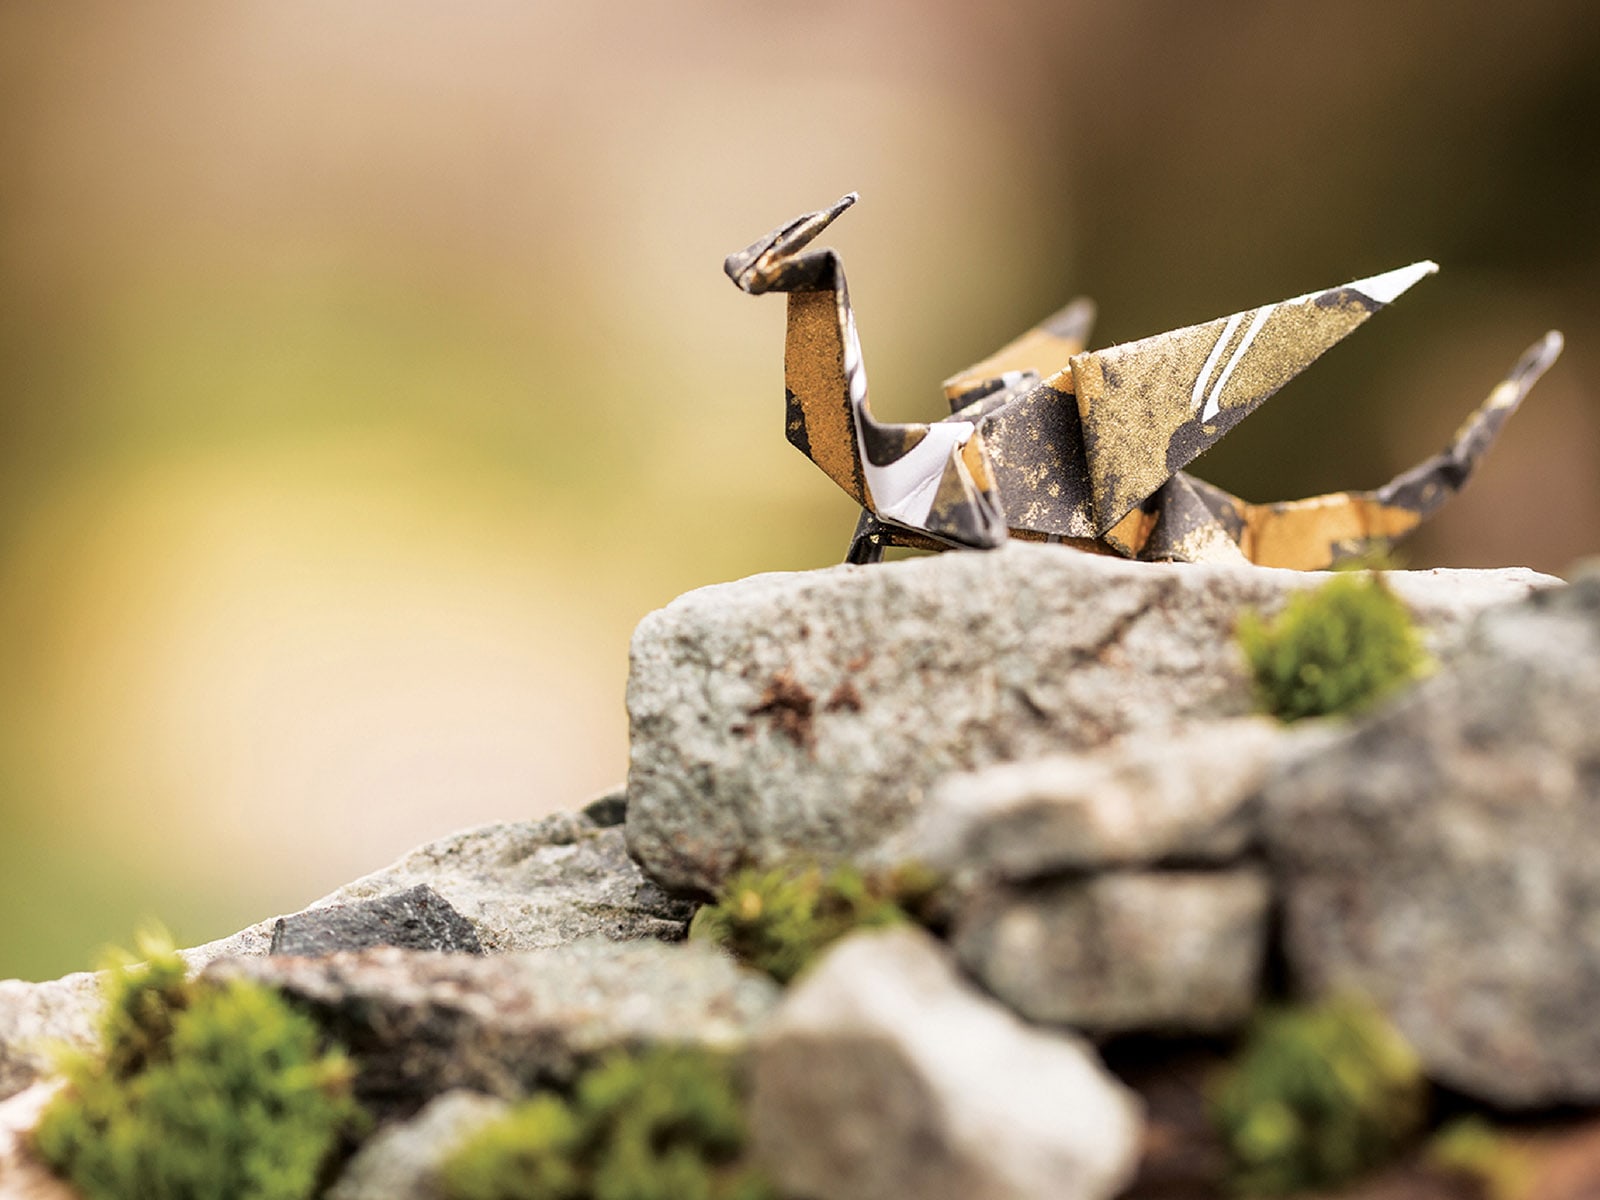 A gold and black origami dragon sitting on a mossy rock against a green background